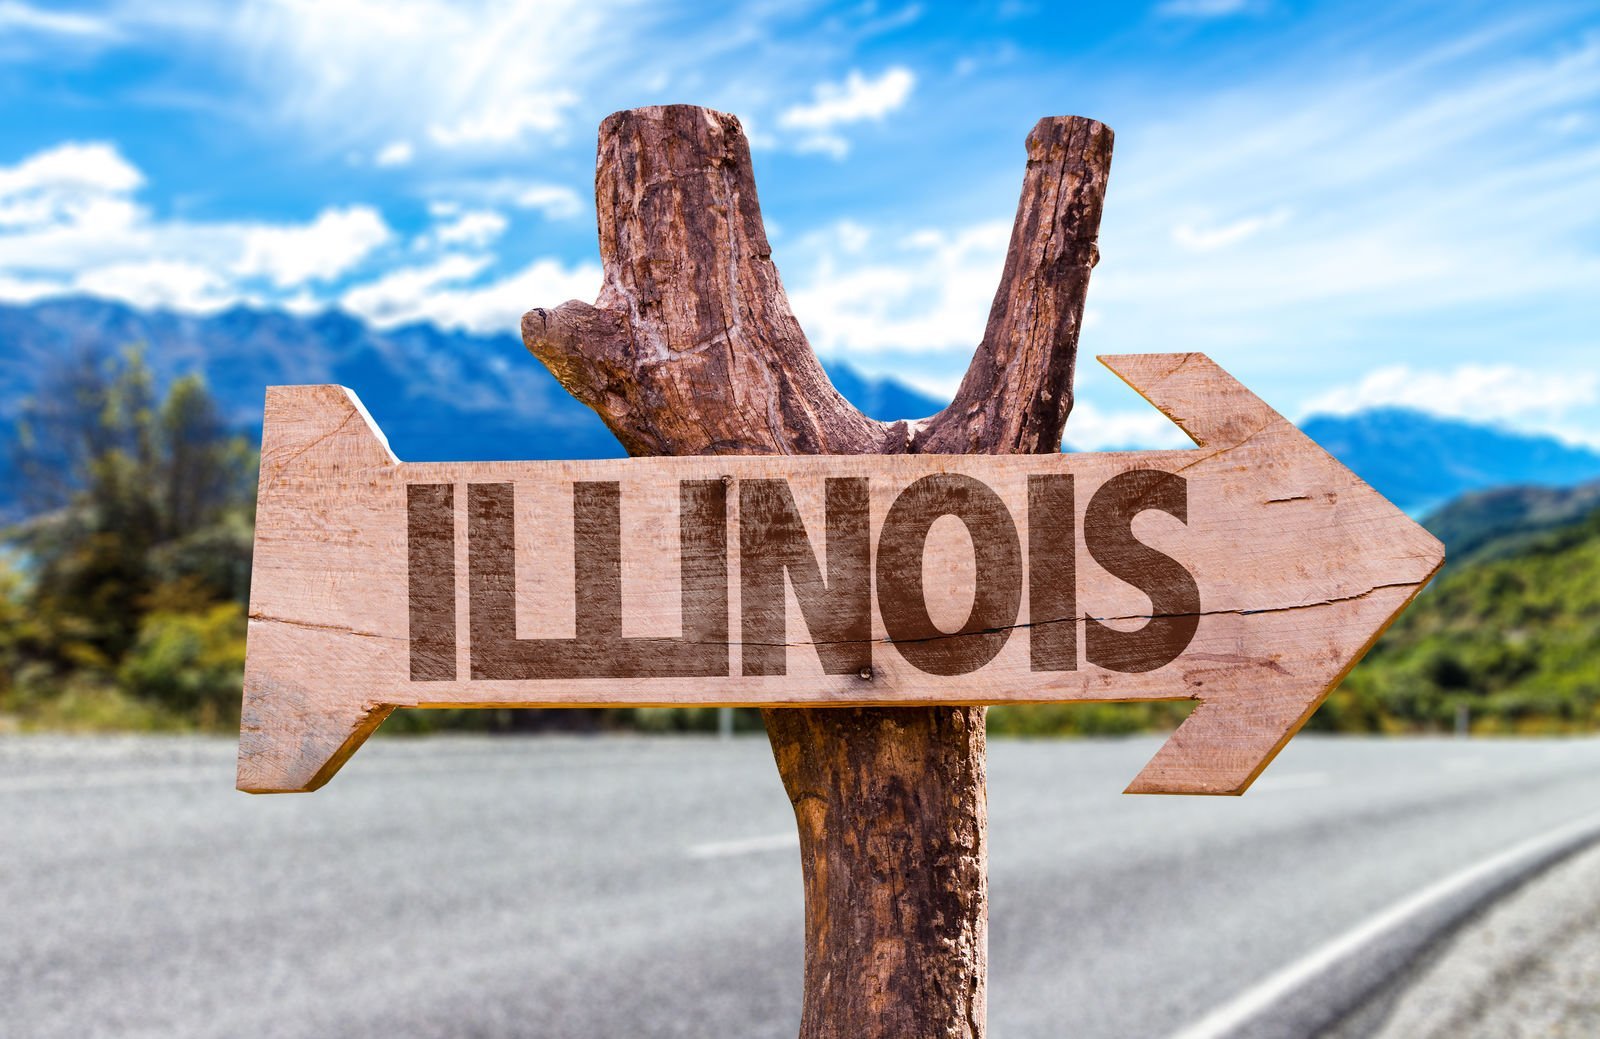 Illinois Windshield Insurance: What are the full glass coverage laws in Illinois?